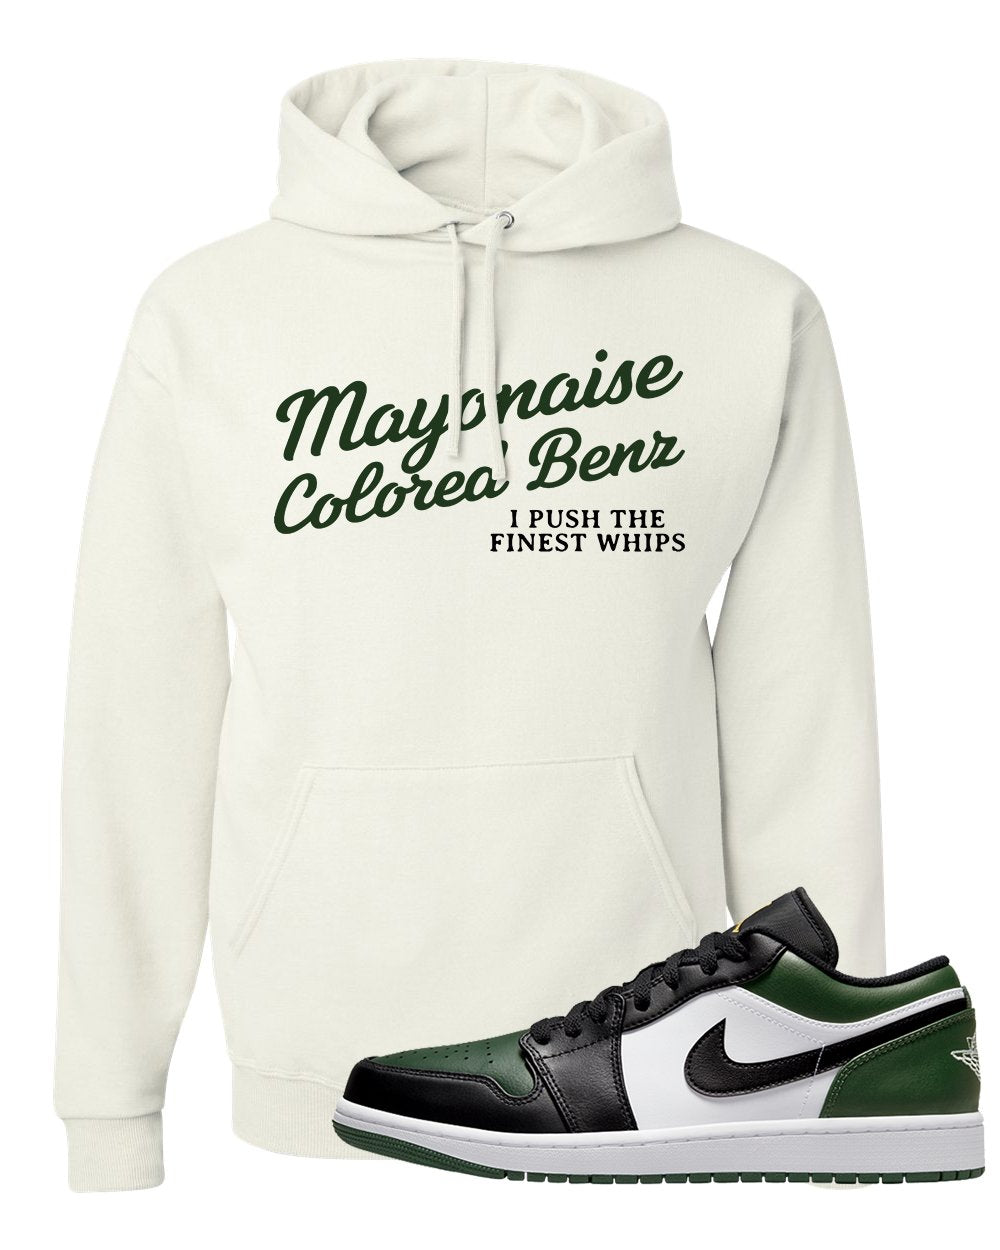 Green Toe Low 1s Hoodie | Mayonaise Colored Benz, White